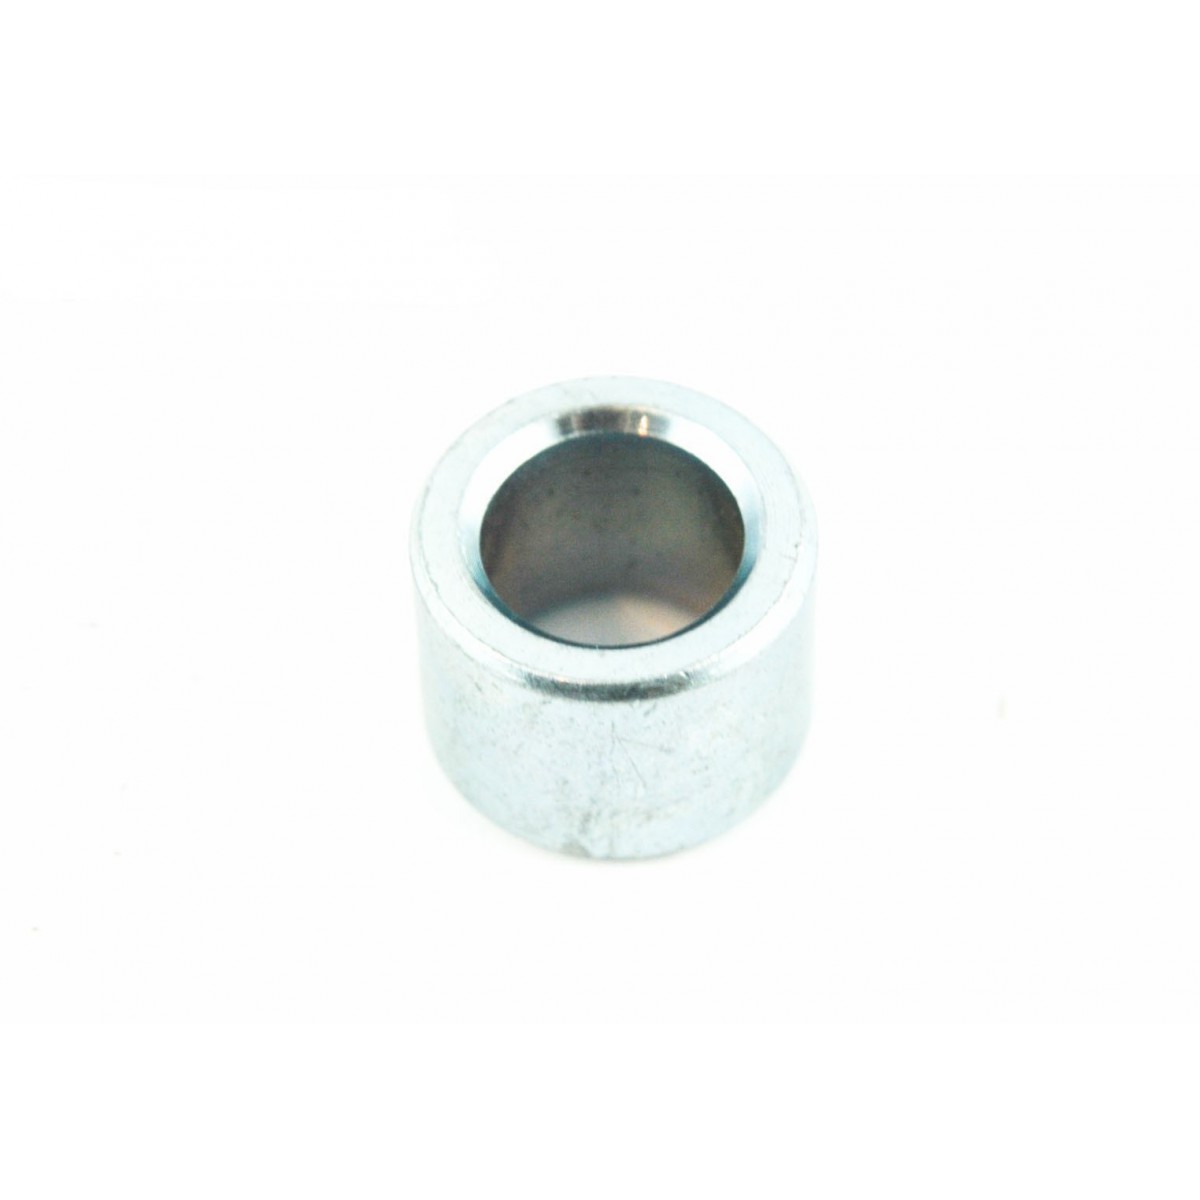 Spacer for mower blades on the M12 bolt